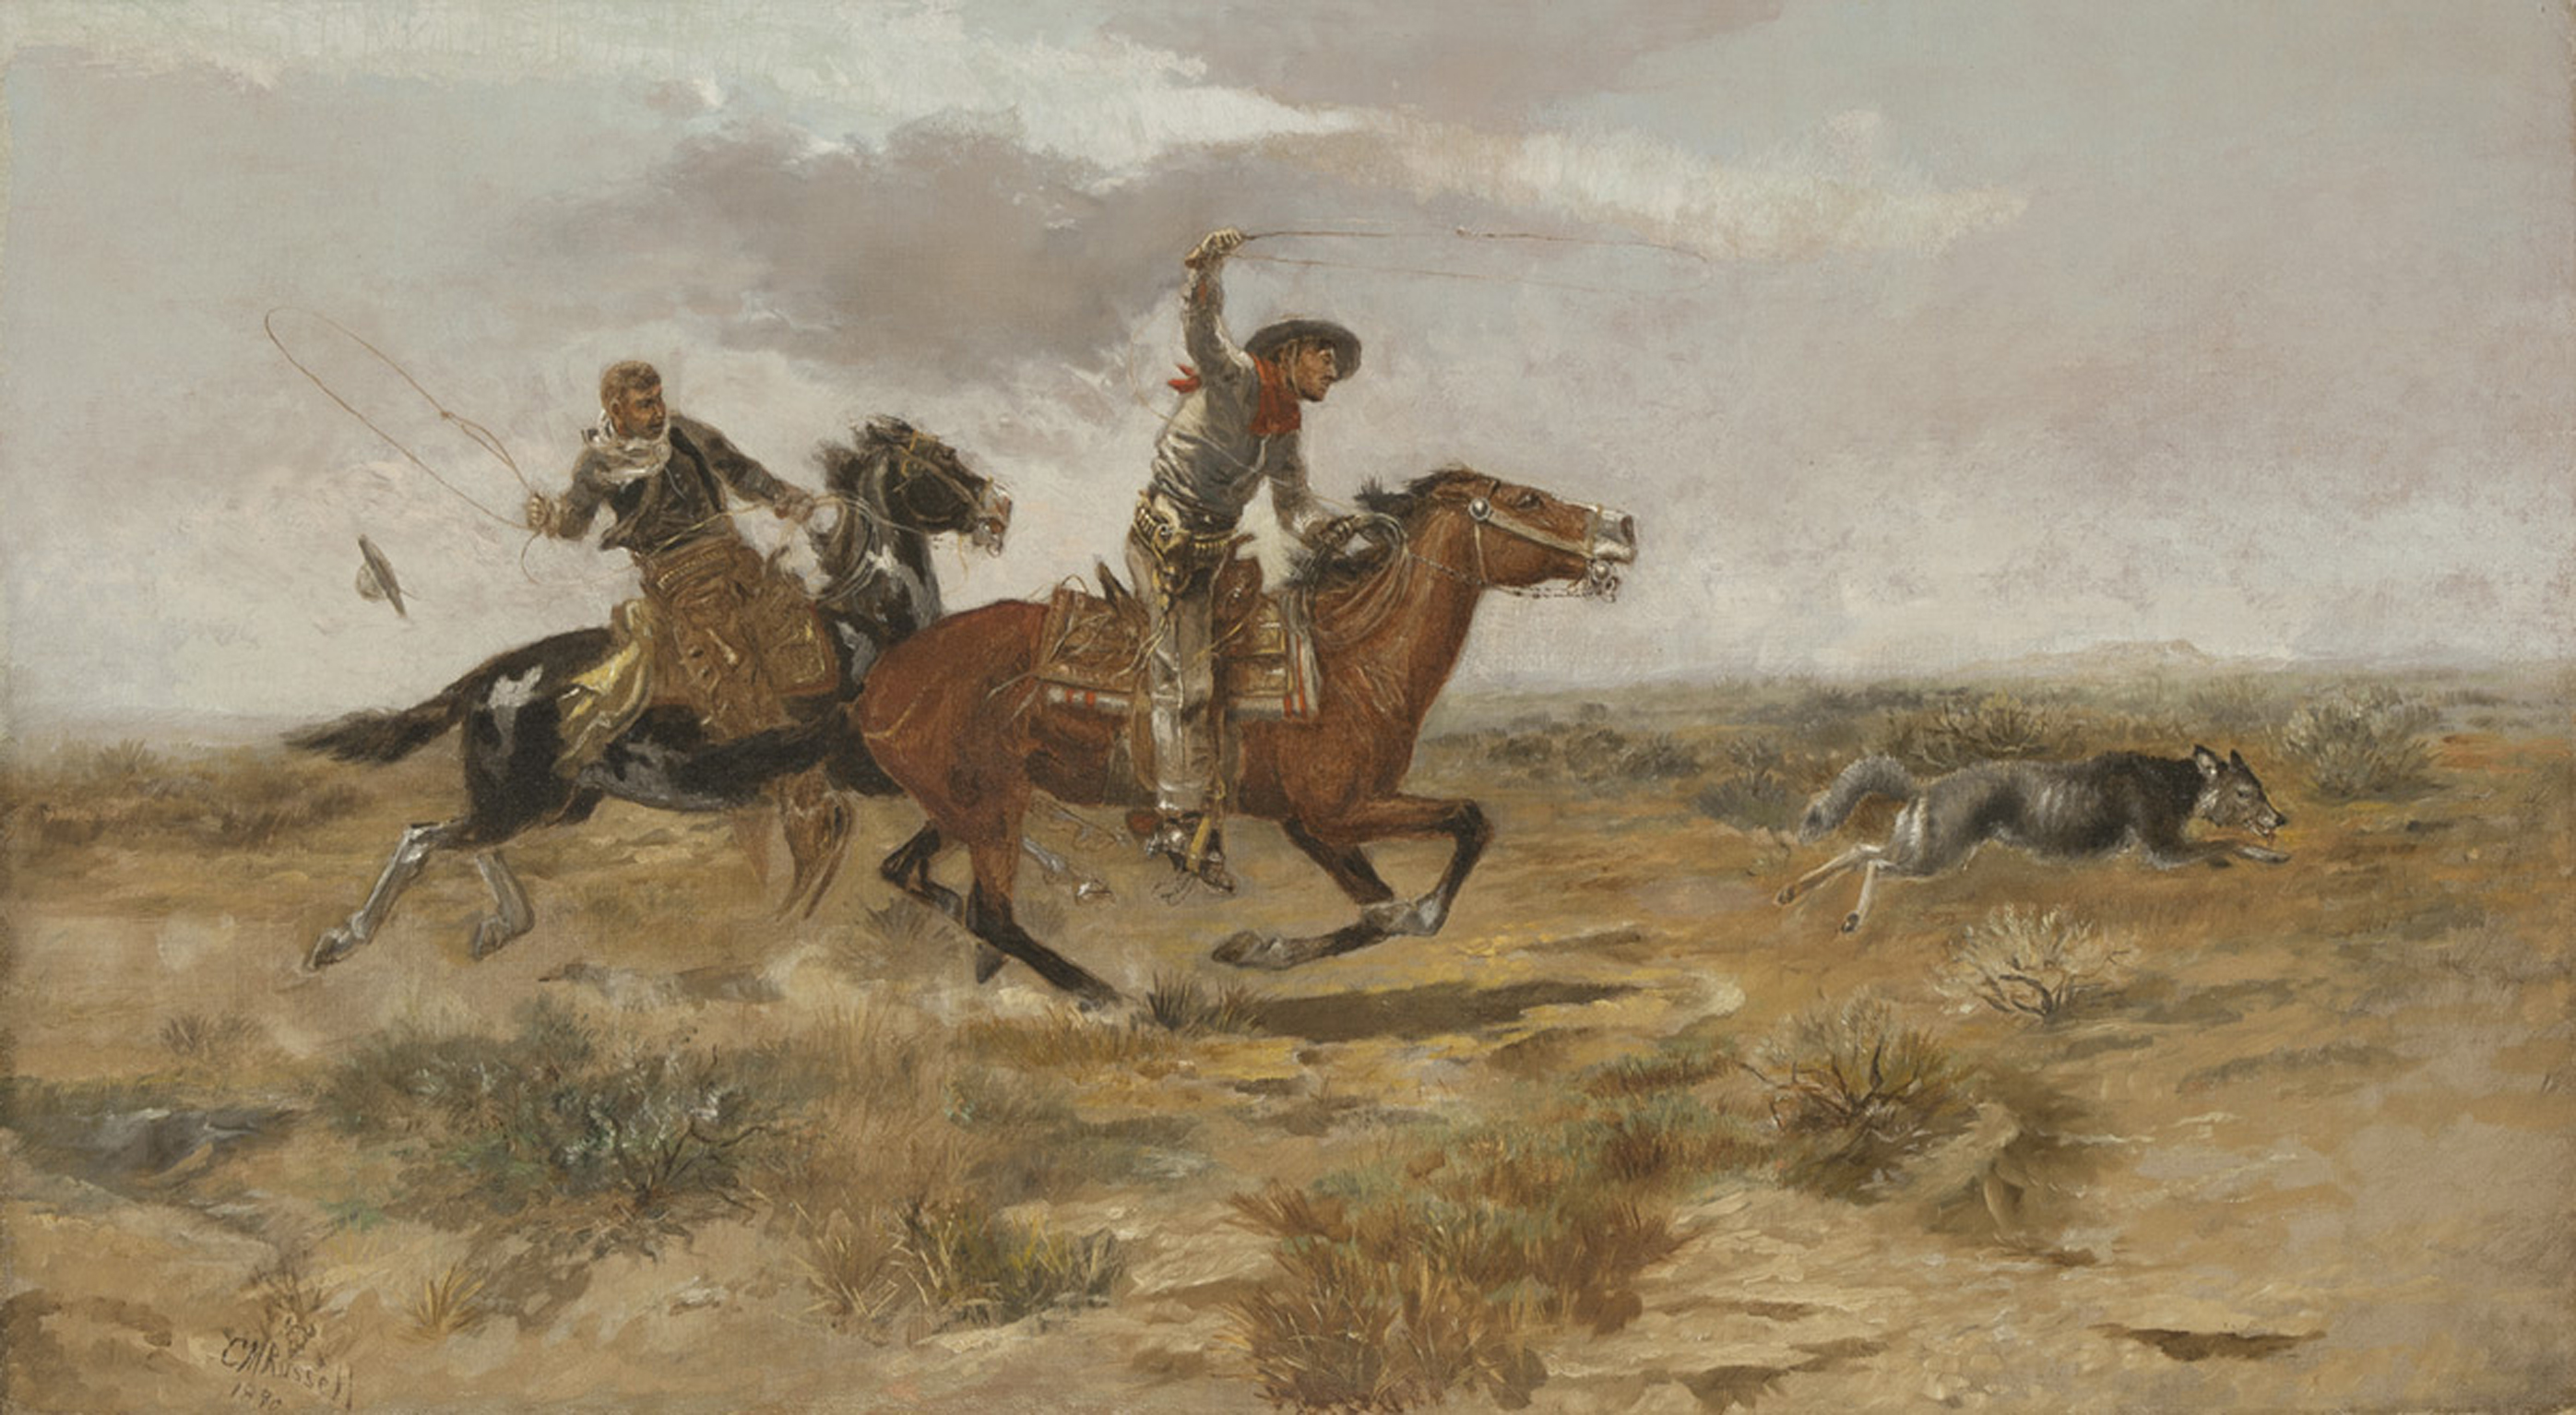 Cowboy Sport-Roping a Wolf, Charles M. Russell, 1890, Sid Richardson Museum